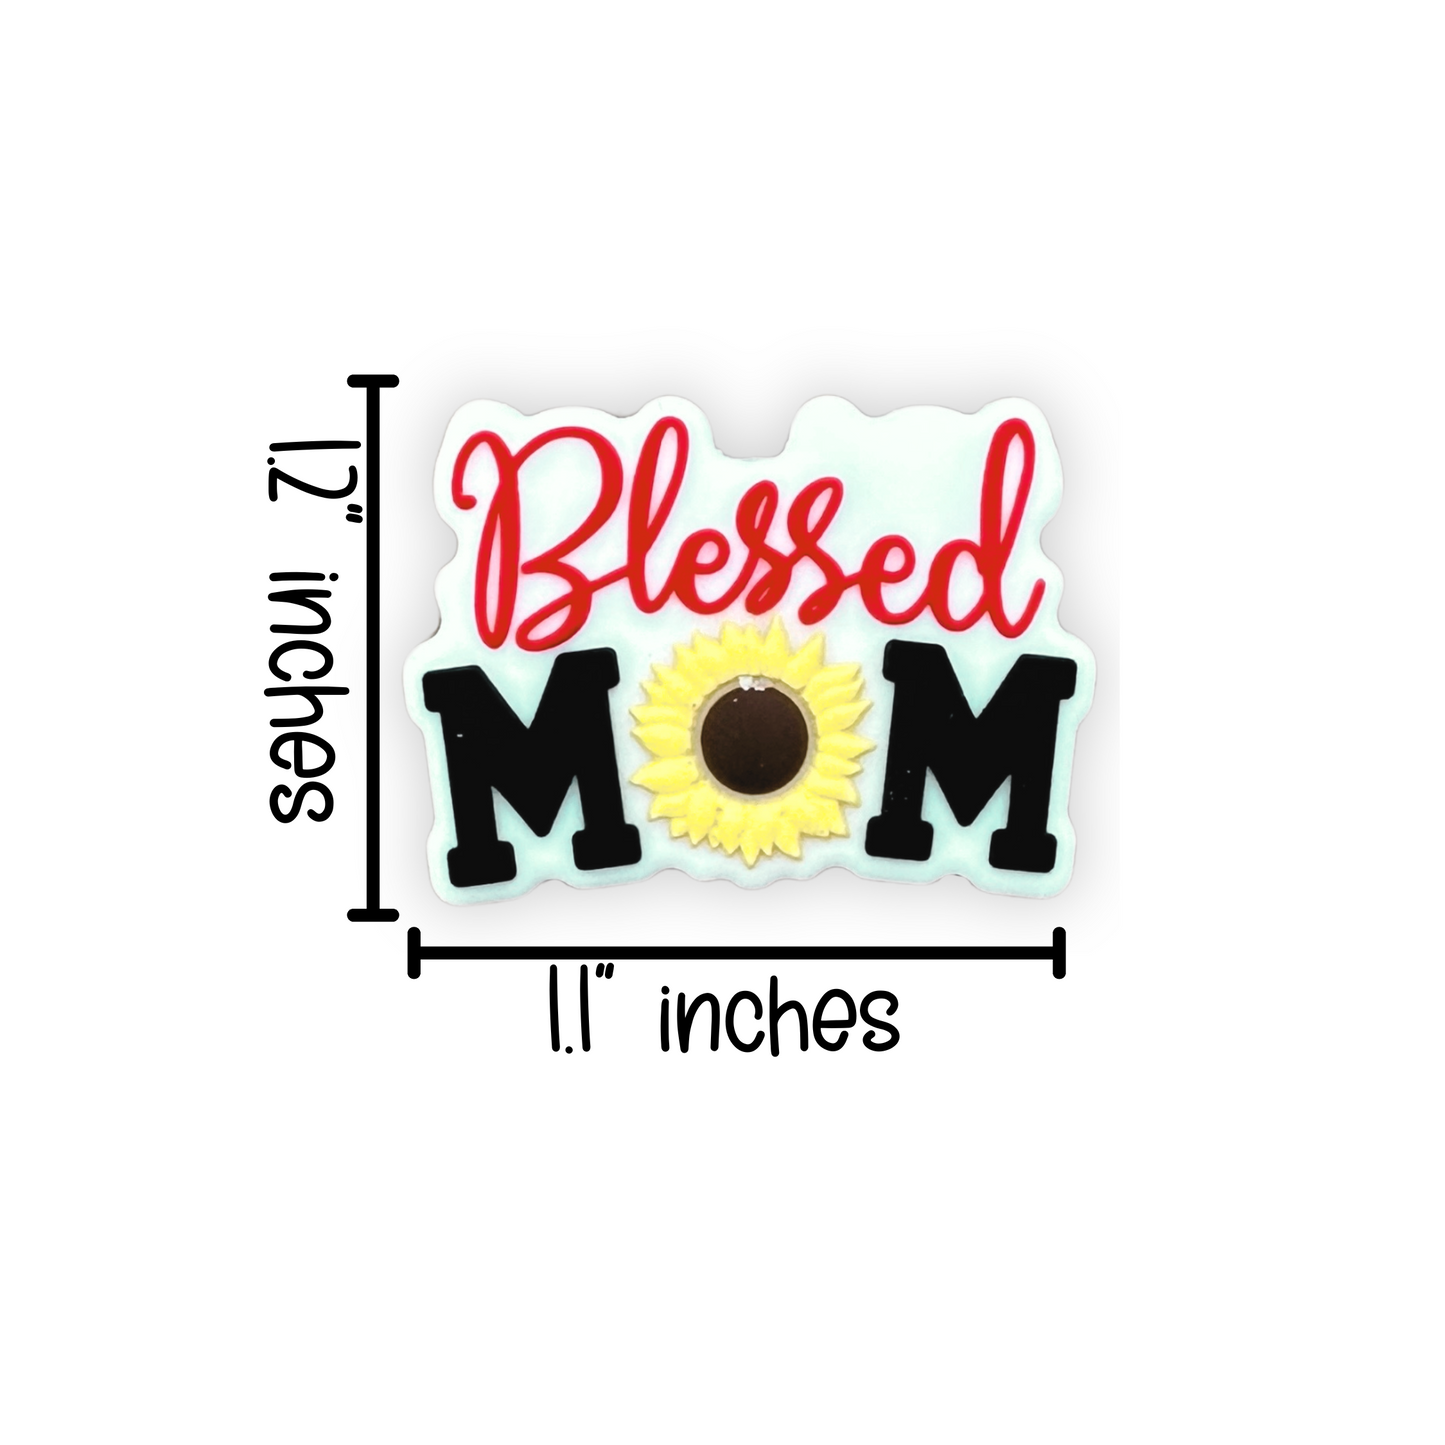 Blessed Mom Silicone Focal Beads | 12 Pack